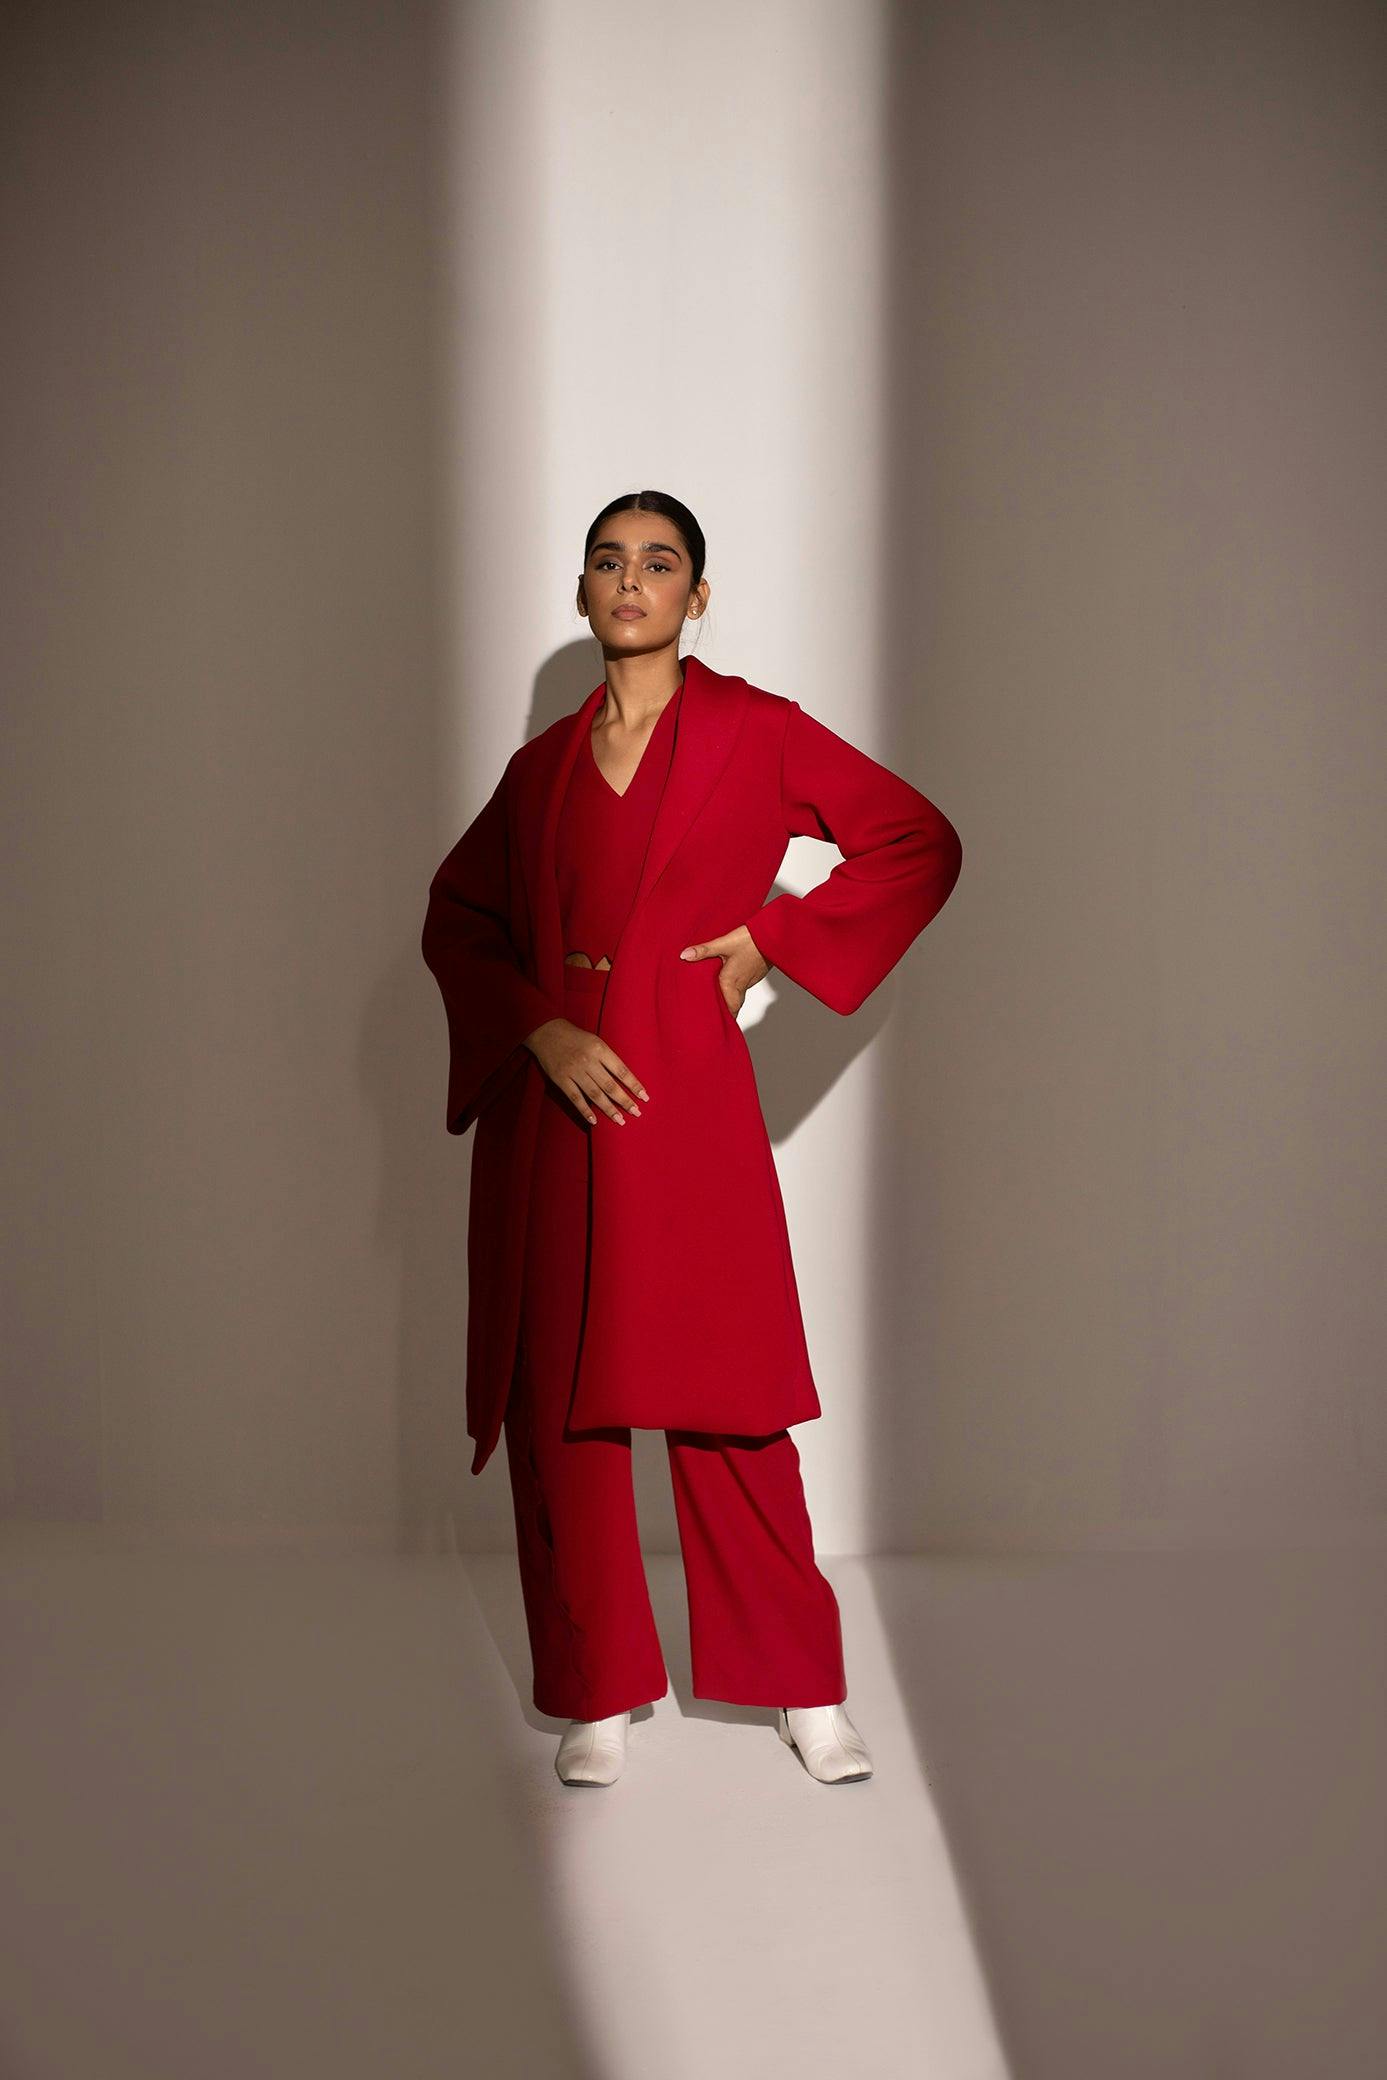 Red Set, a product by Kritika Madan